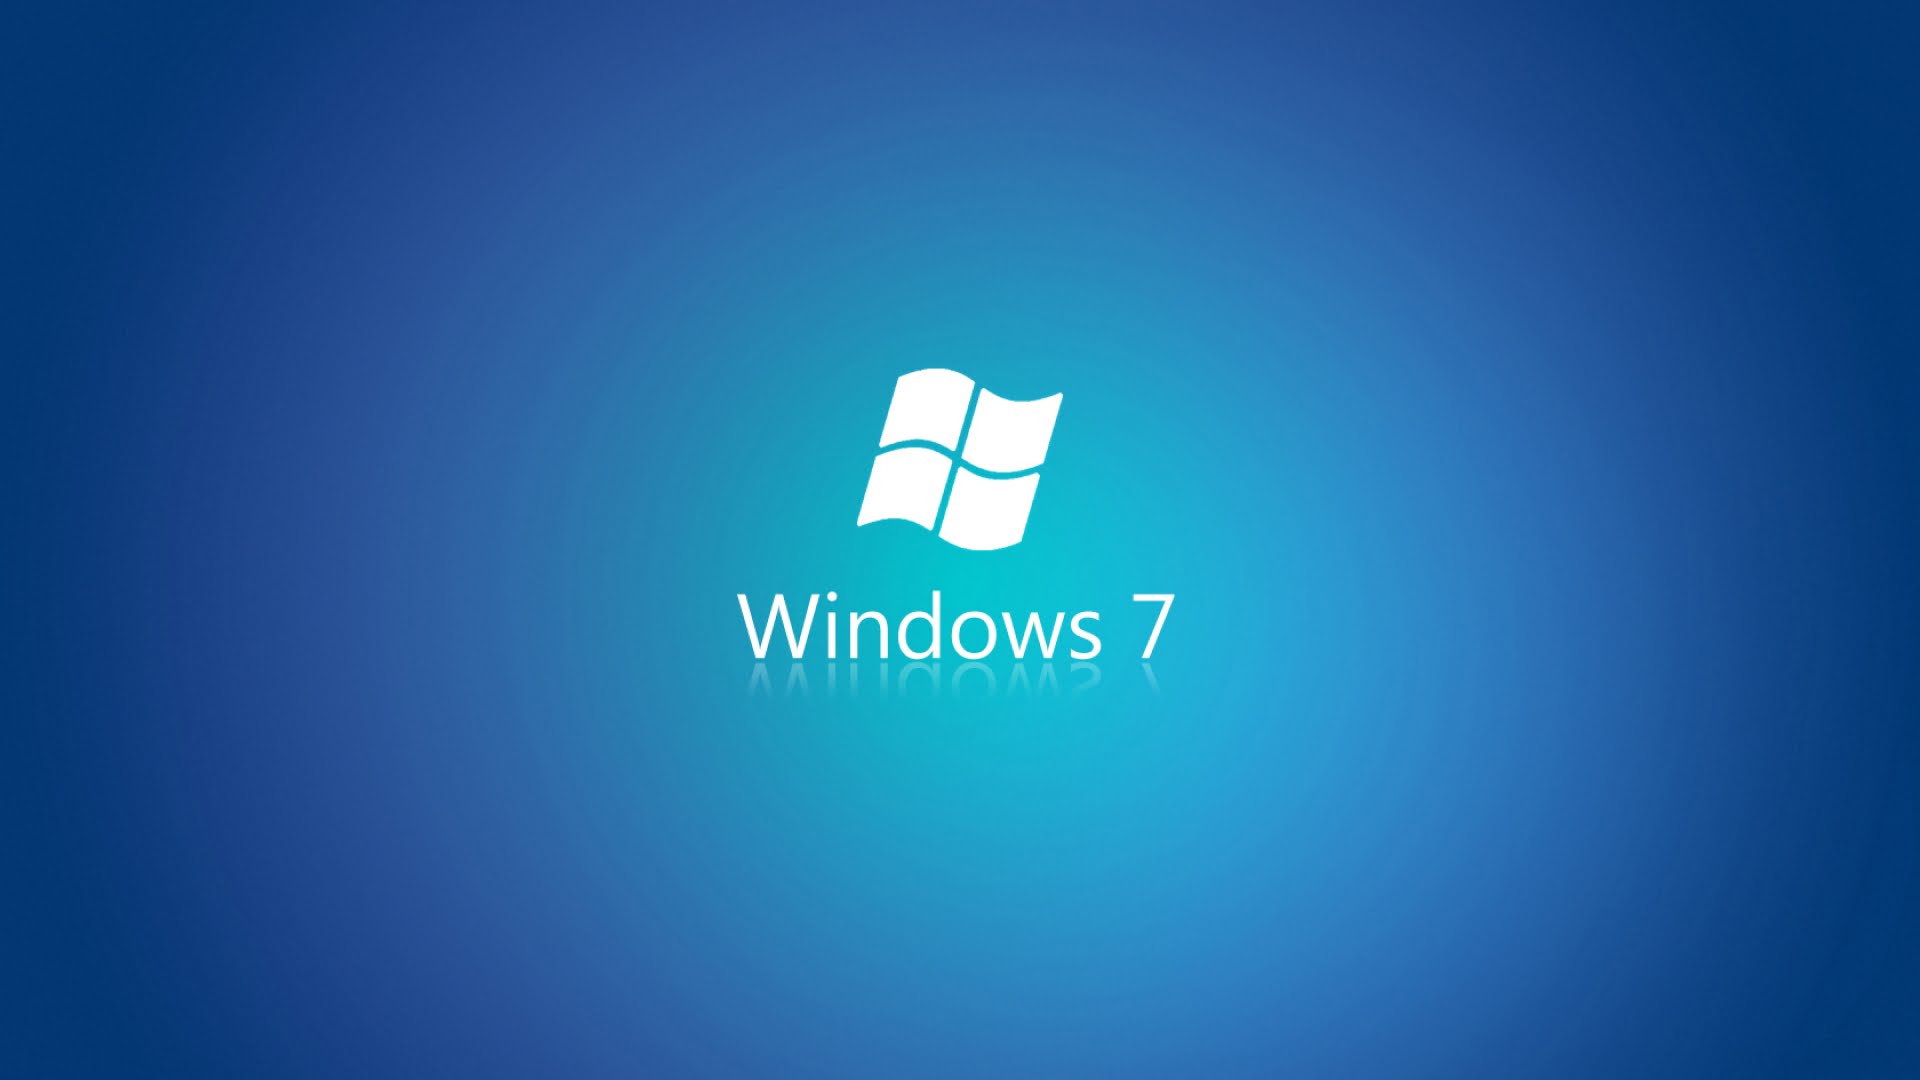 windows 7 , extended security updates, Windows 10